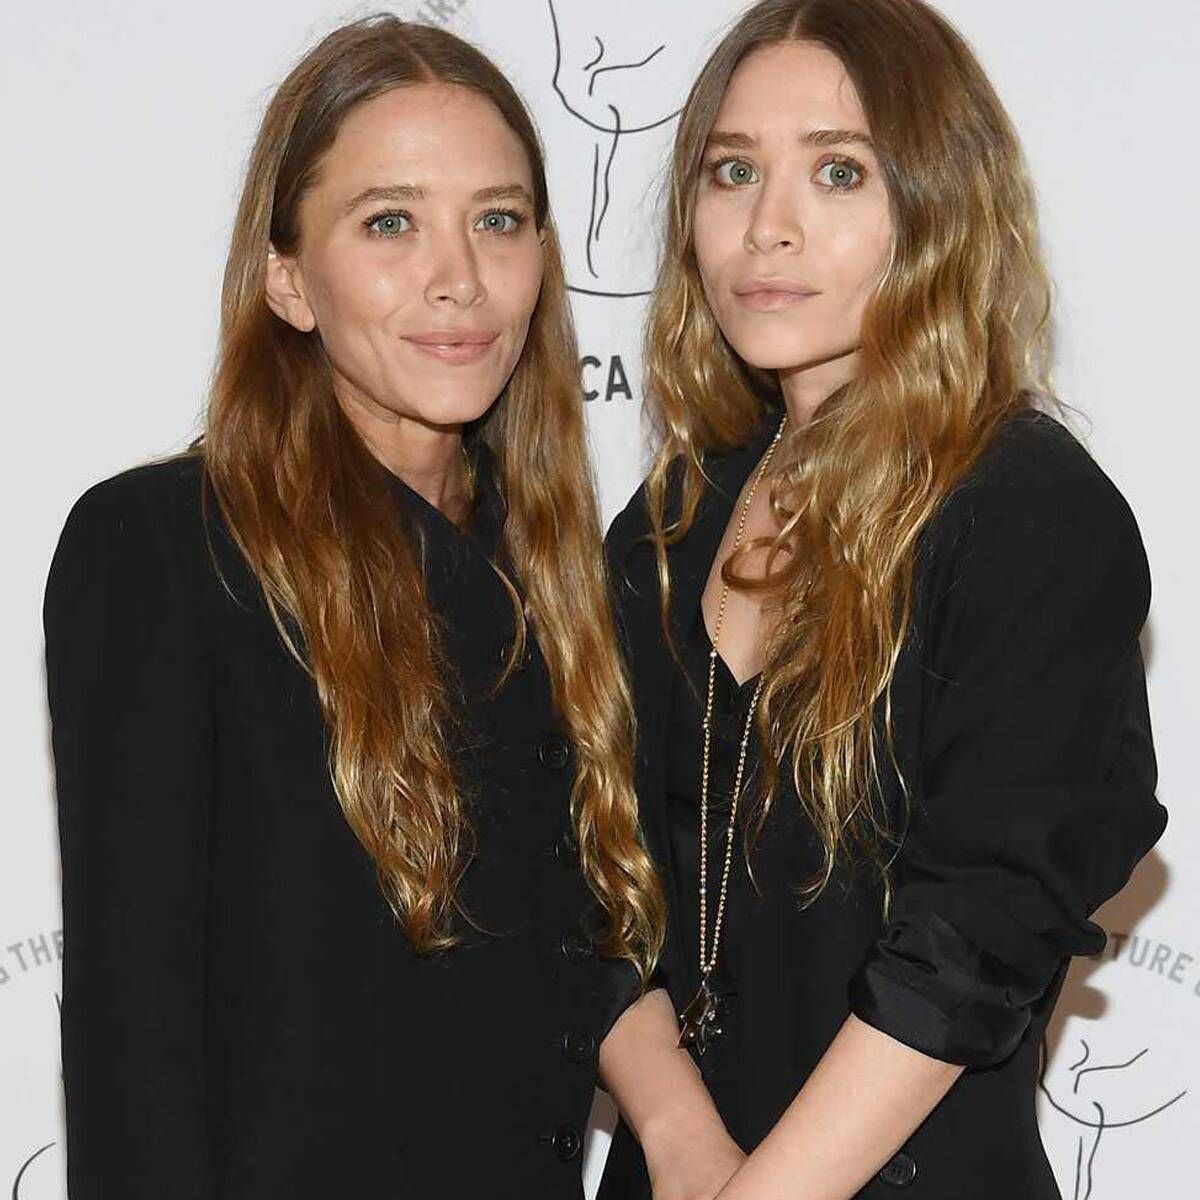 Mary-Kate and Ashley and Their Fashion Line The Row